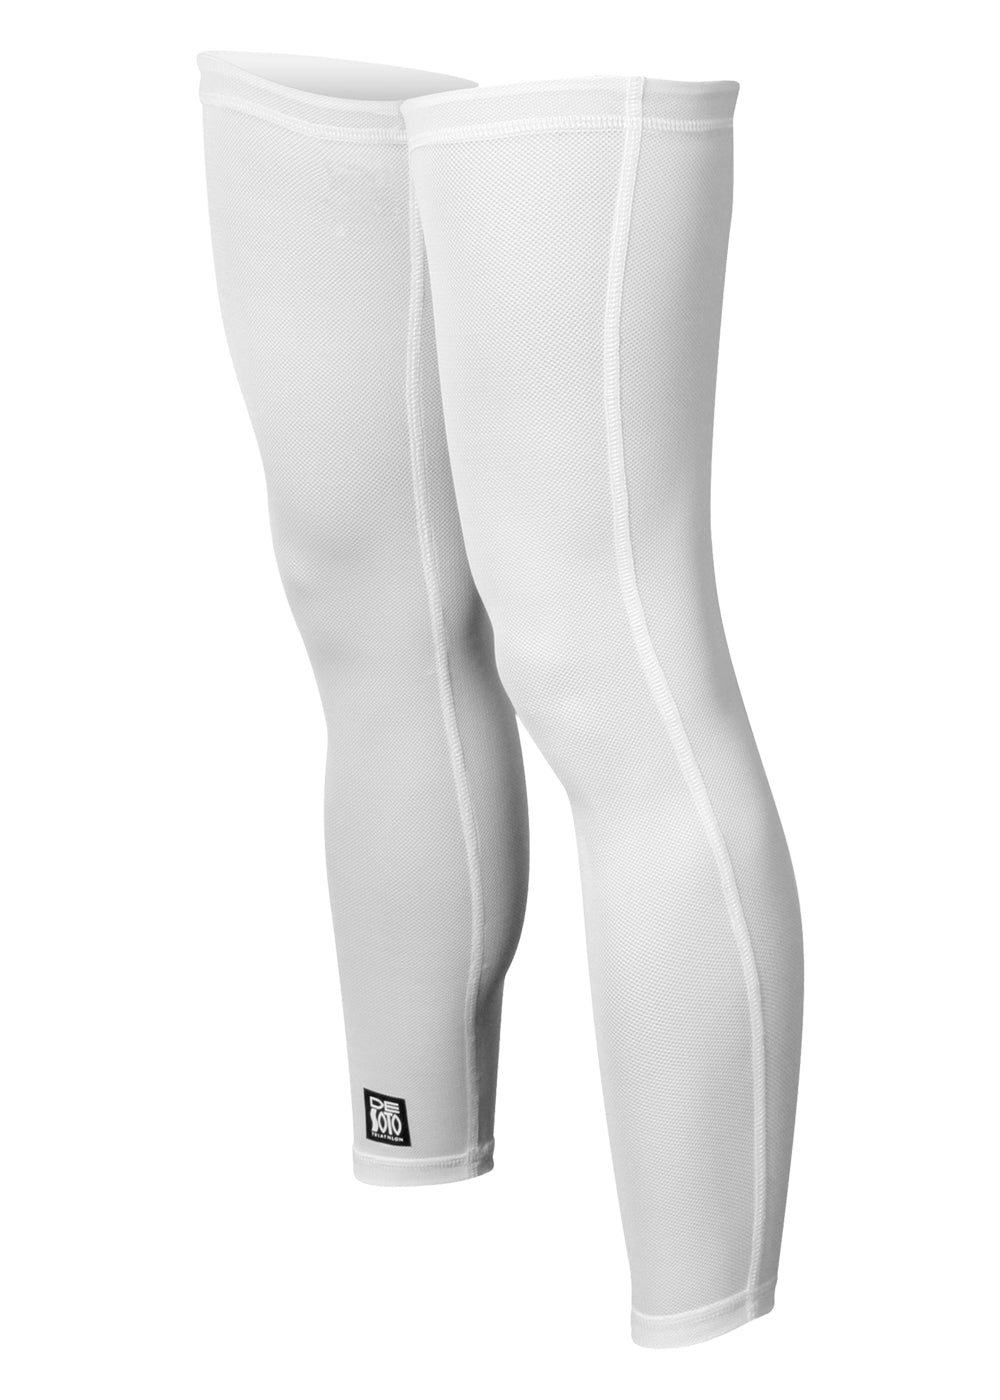 Add Gear Full Length Leg Sleeves for UV Protection - Cycling